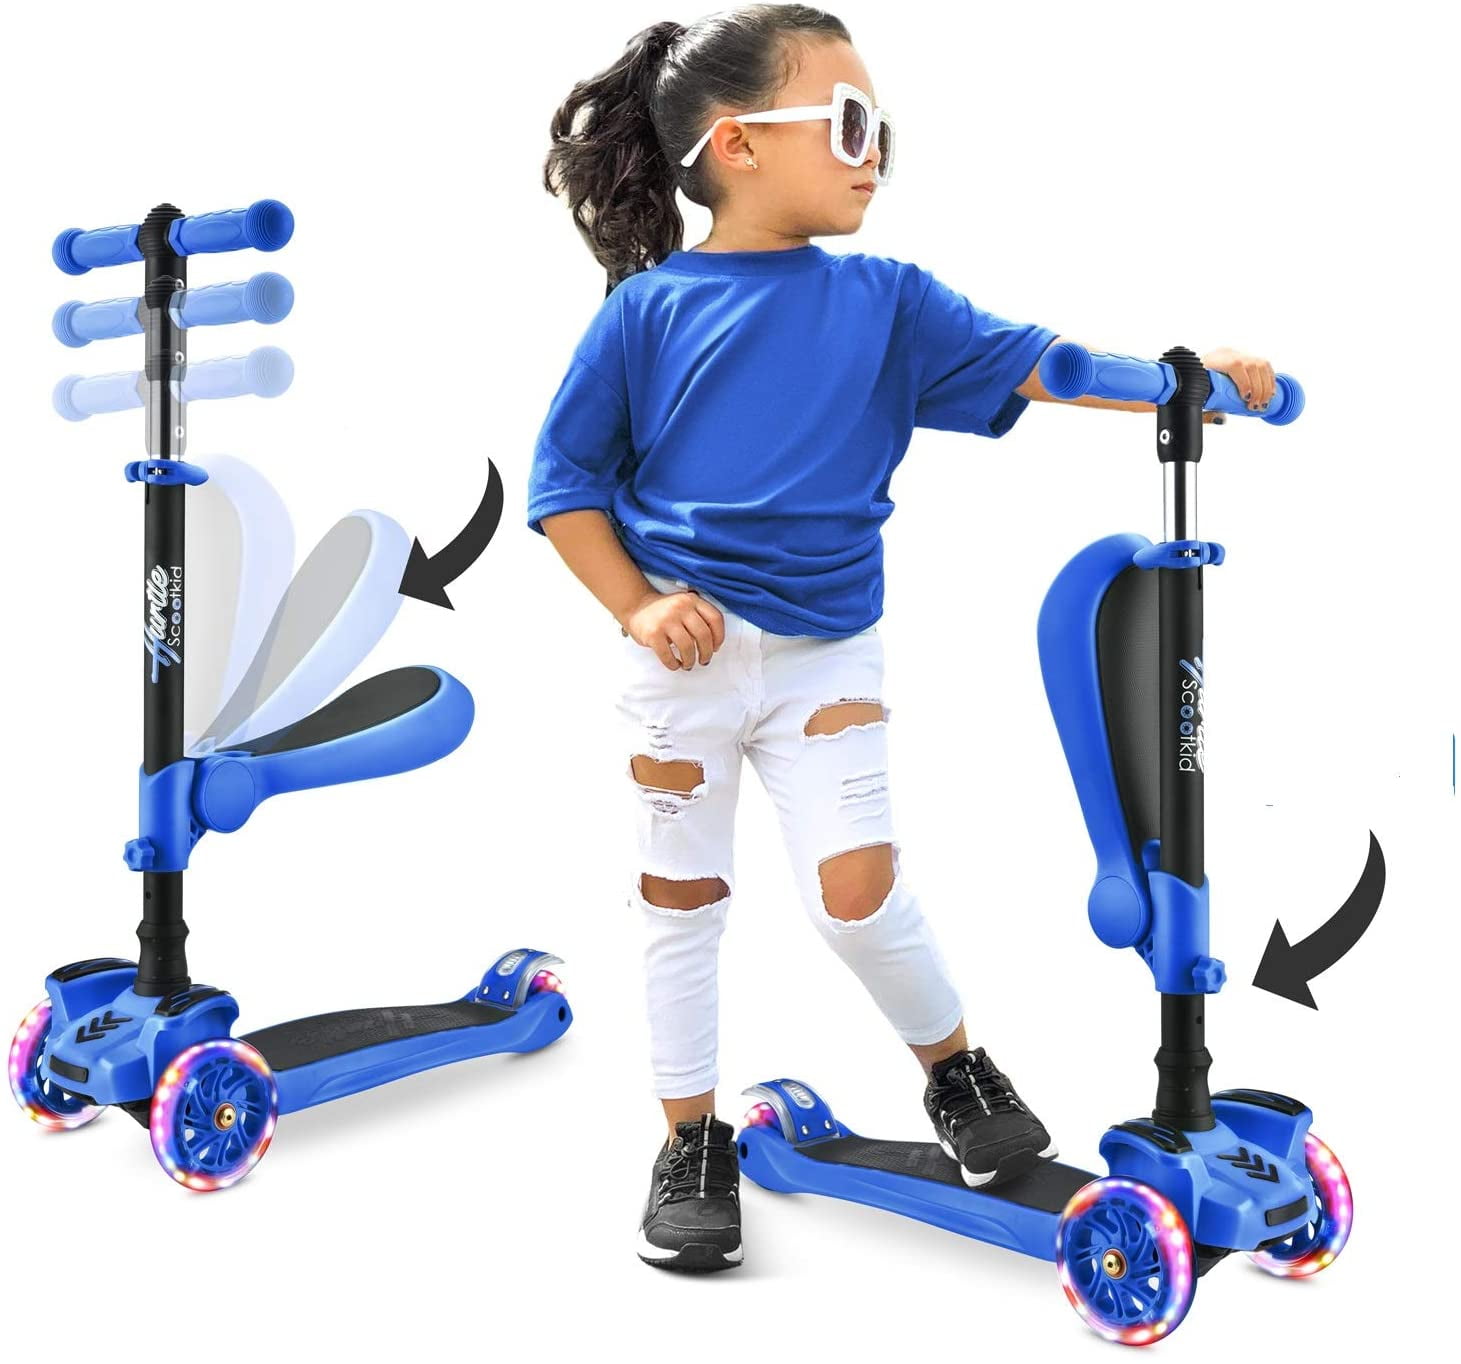 Adjustable Height.. Details about   S SKIDEE Scooter for Kids with Foldable and Removable Seat 